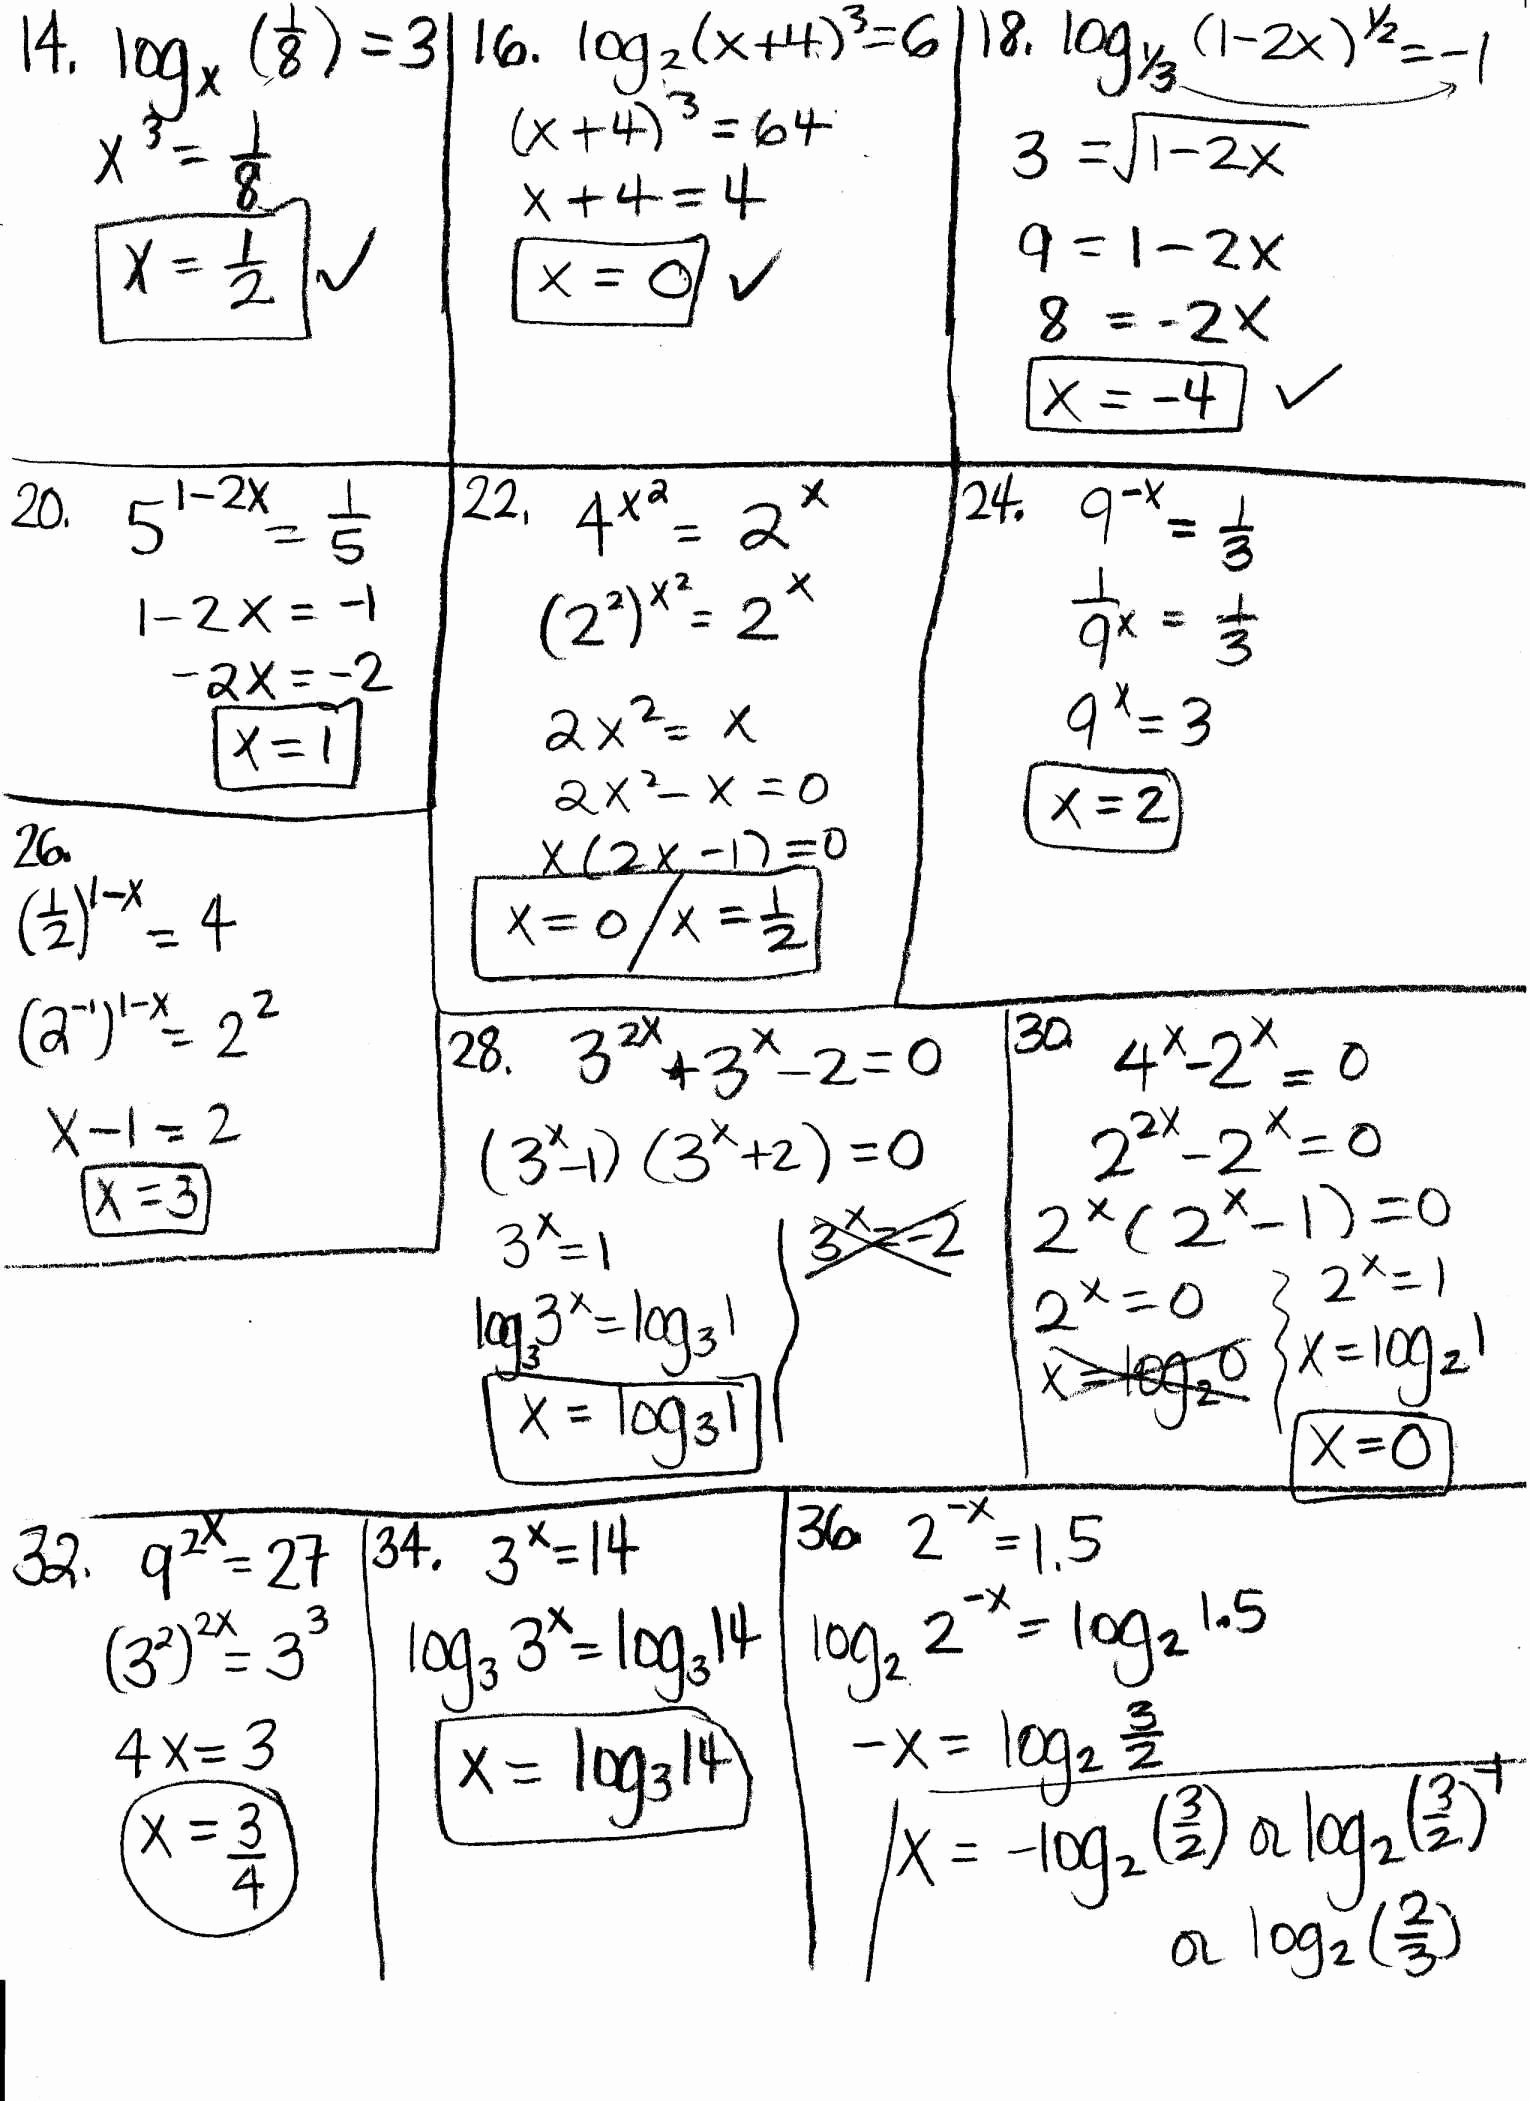 Logarithmic Equations Worksheet with Answers Elegant Logarithmic Equations Worksheet with Answers Math